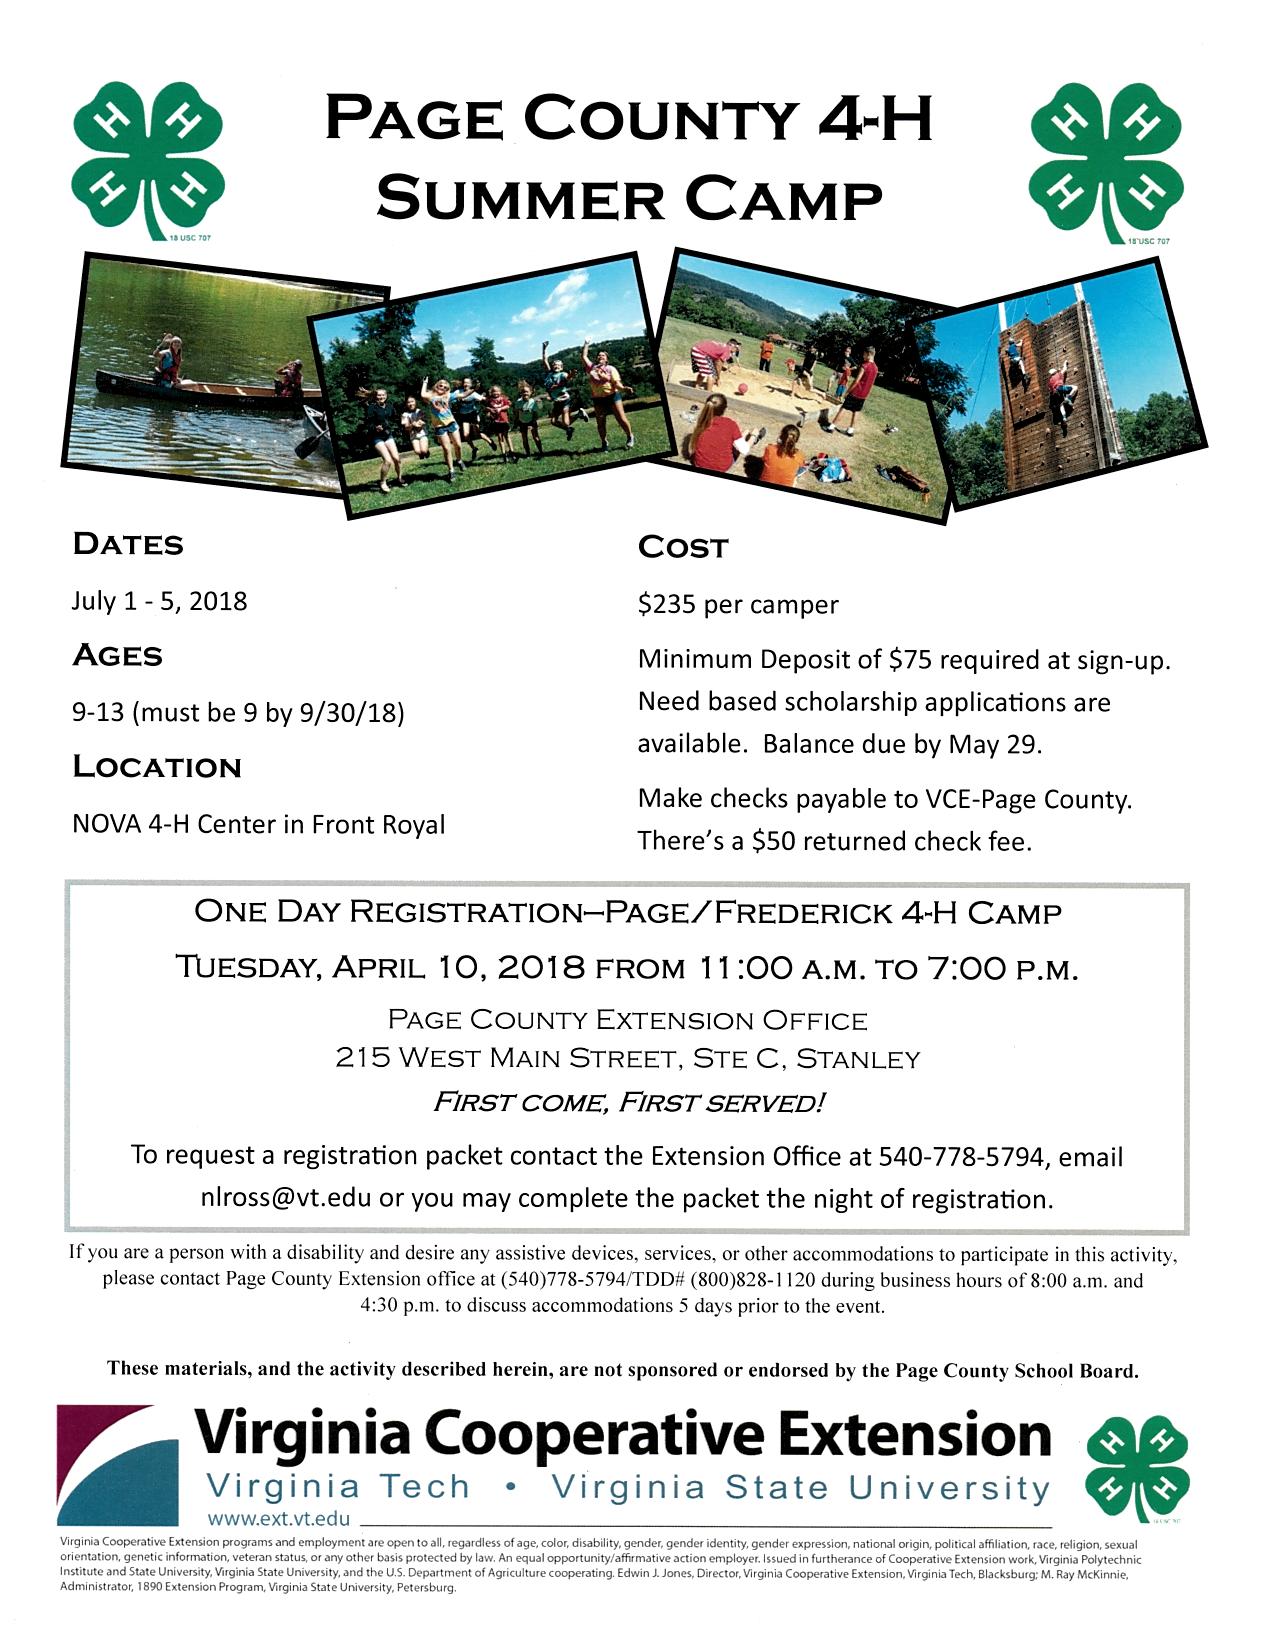 Page County 4H Summer Camp Registration LurayPage Chamber of Commerce